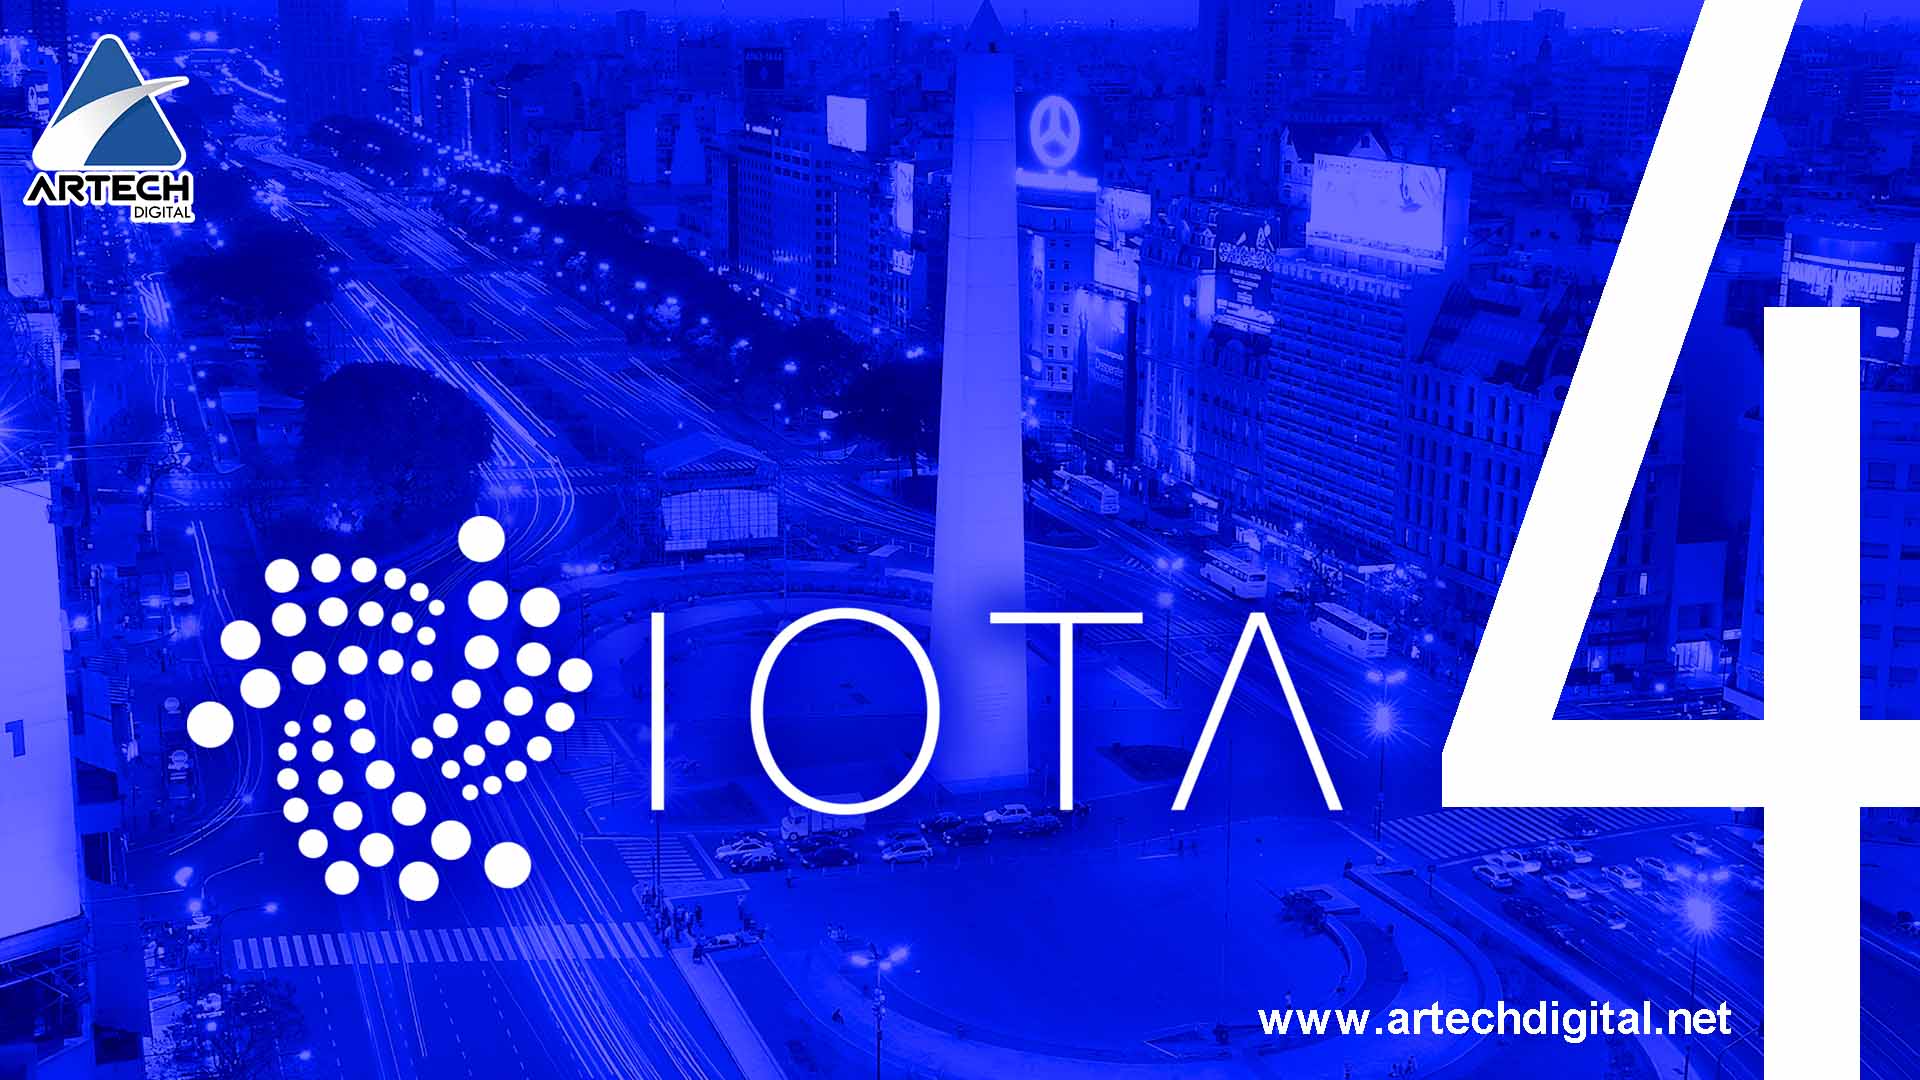 Fourth edition of IOTA Buenos Aires Meetup will be held on November 22nd